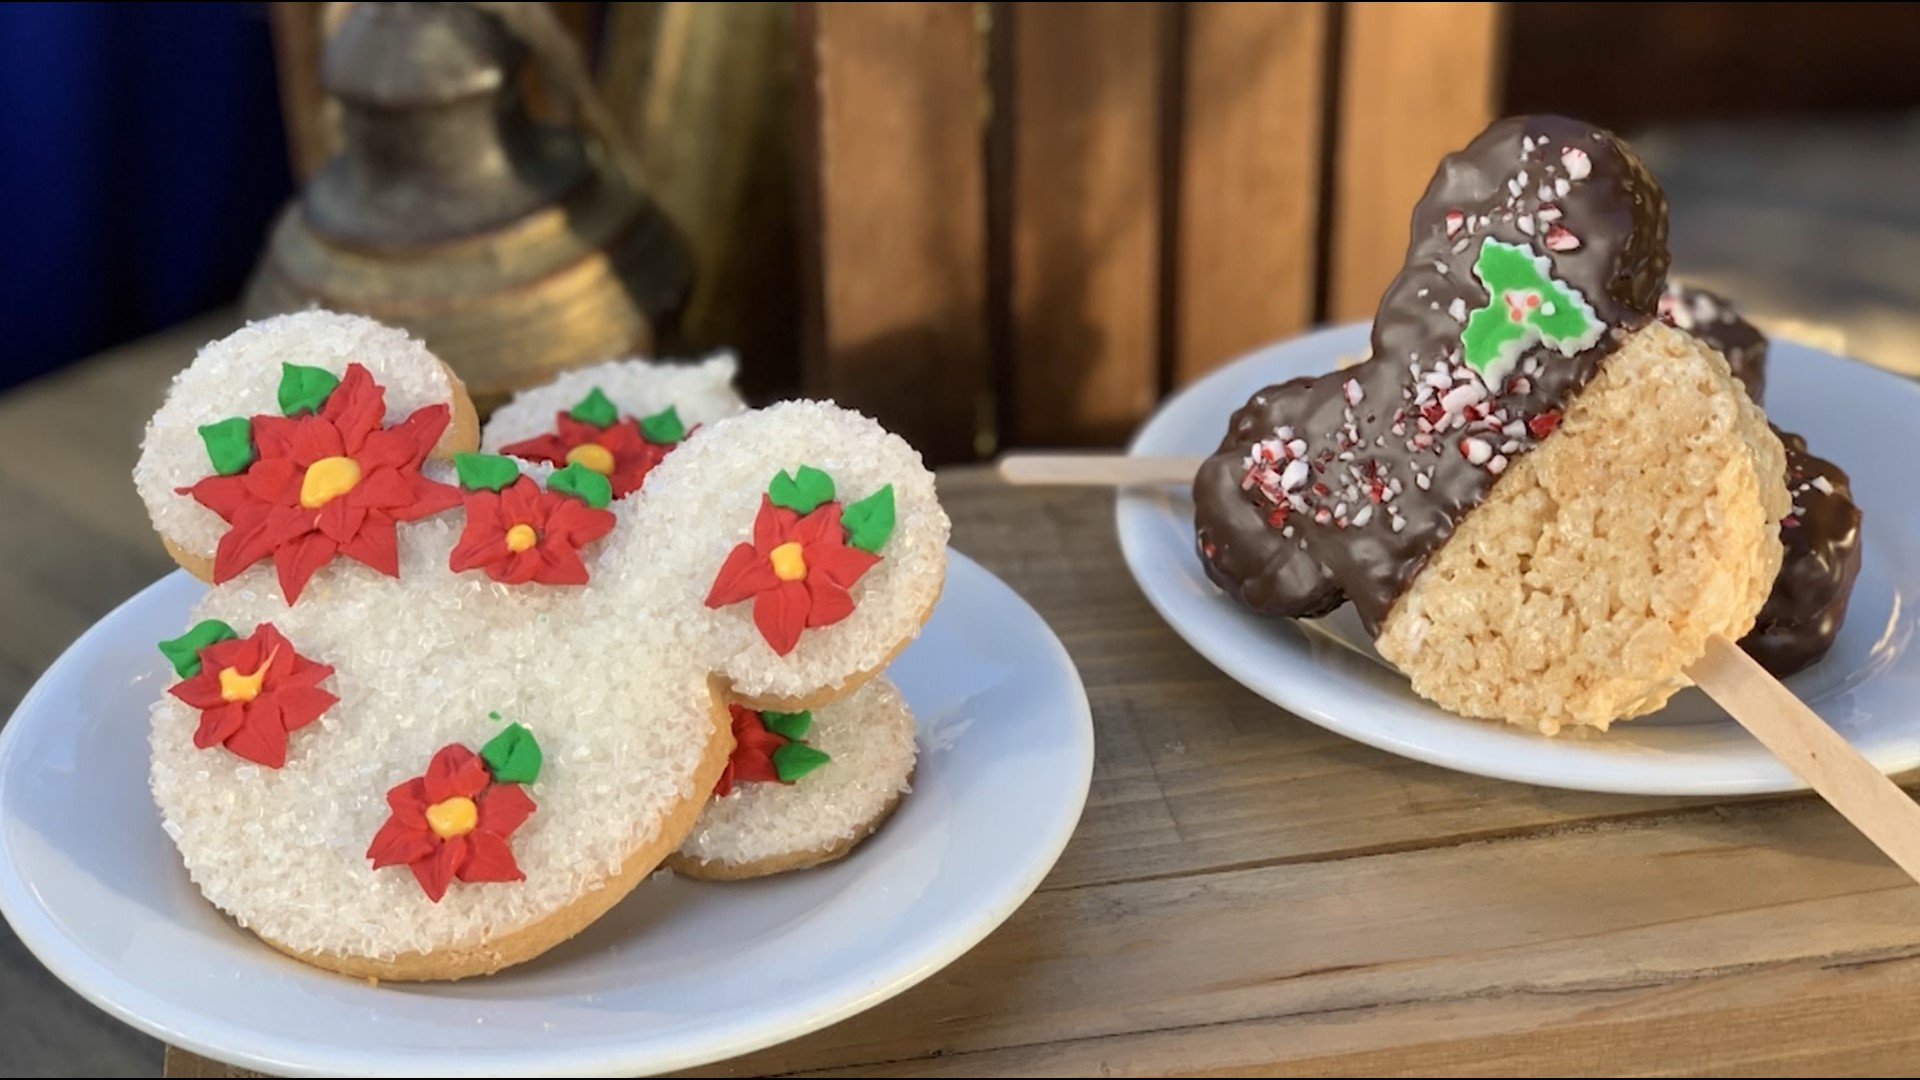 From grilled garlic dishes to tasty tarts and macarons, Disneyland has a lot cooking in the oven. Travel and accommodations for New Day provided by Disney.